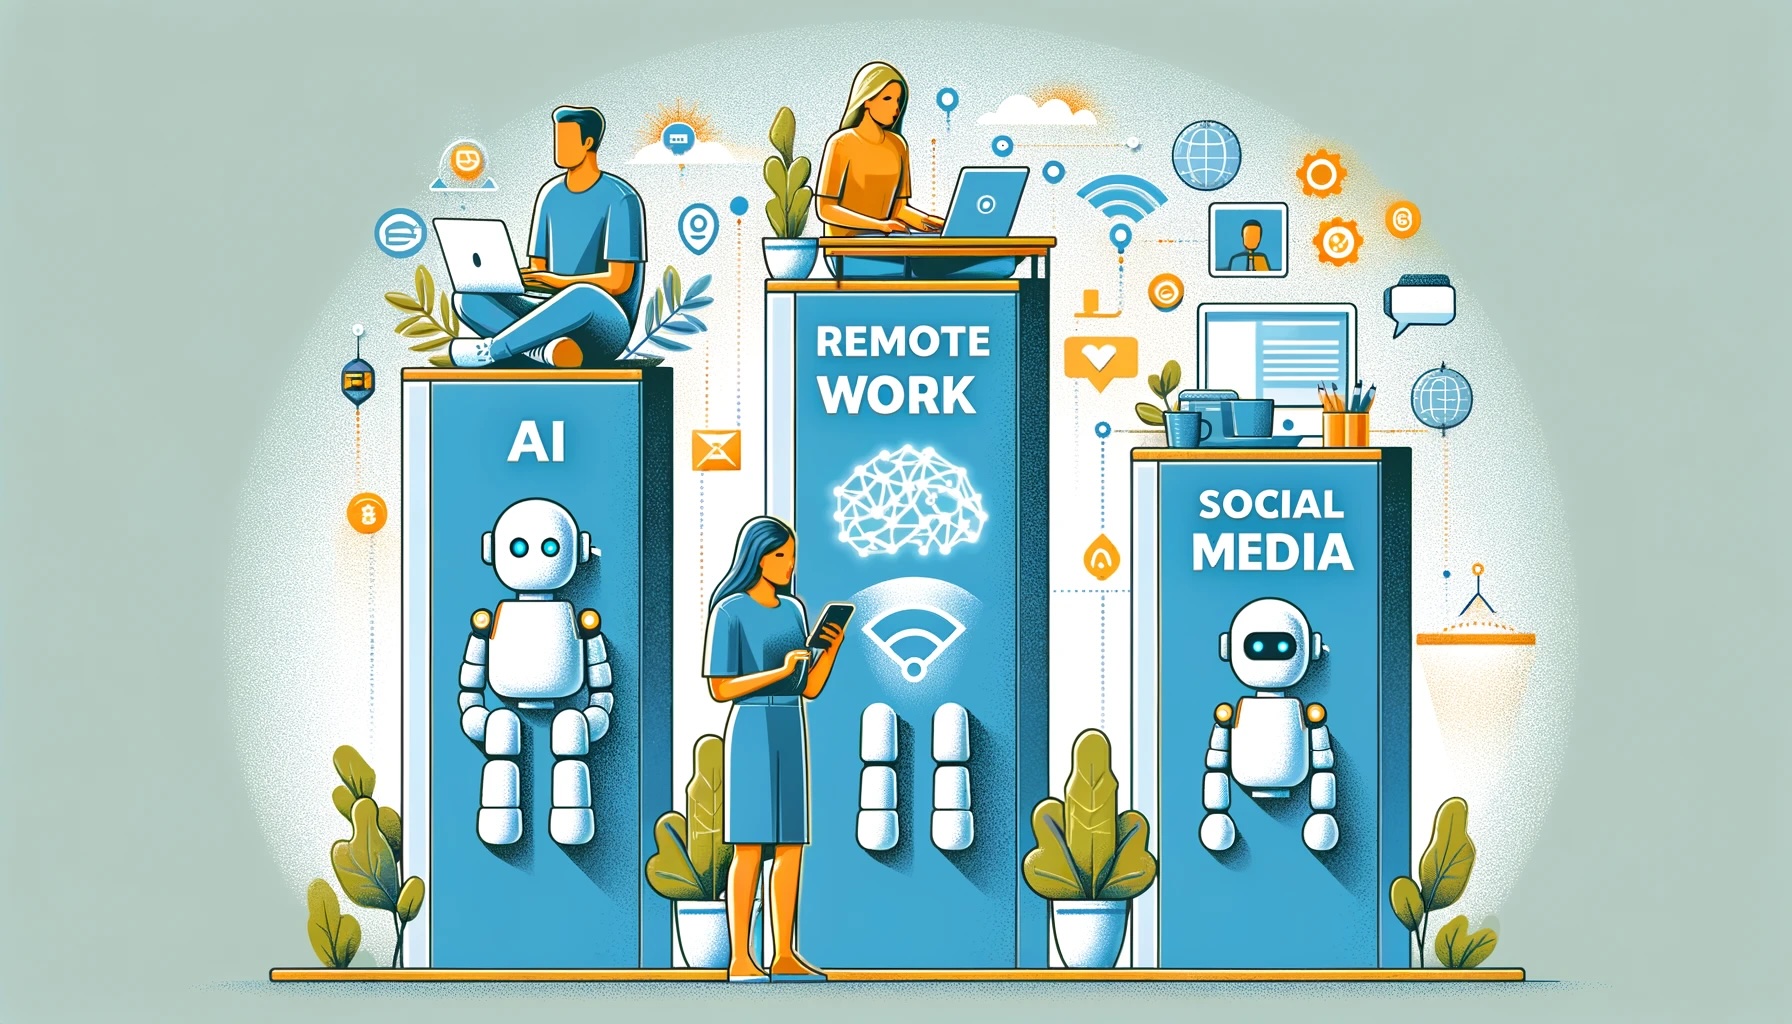 A graphic image showing three pilars of ecommerce success: artificial intelligence, remote work capability, and social media